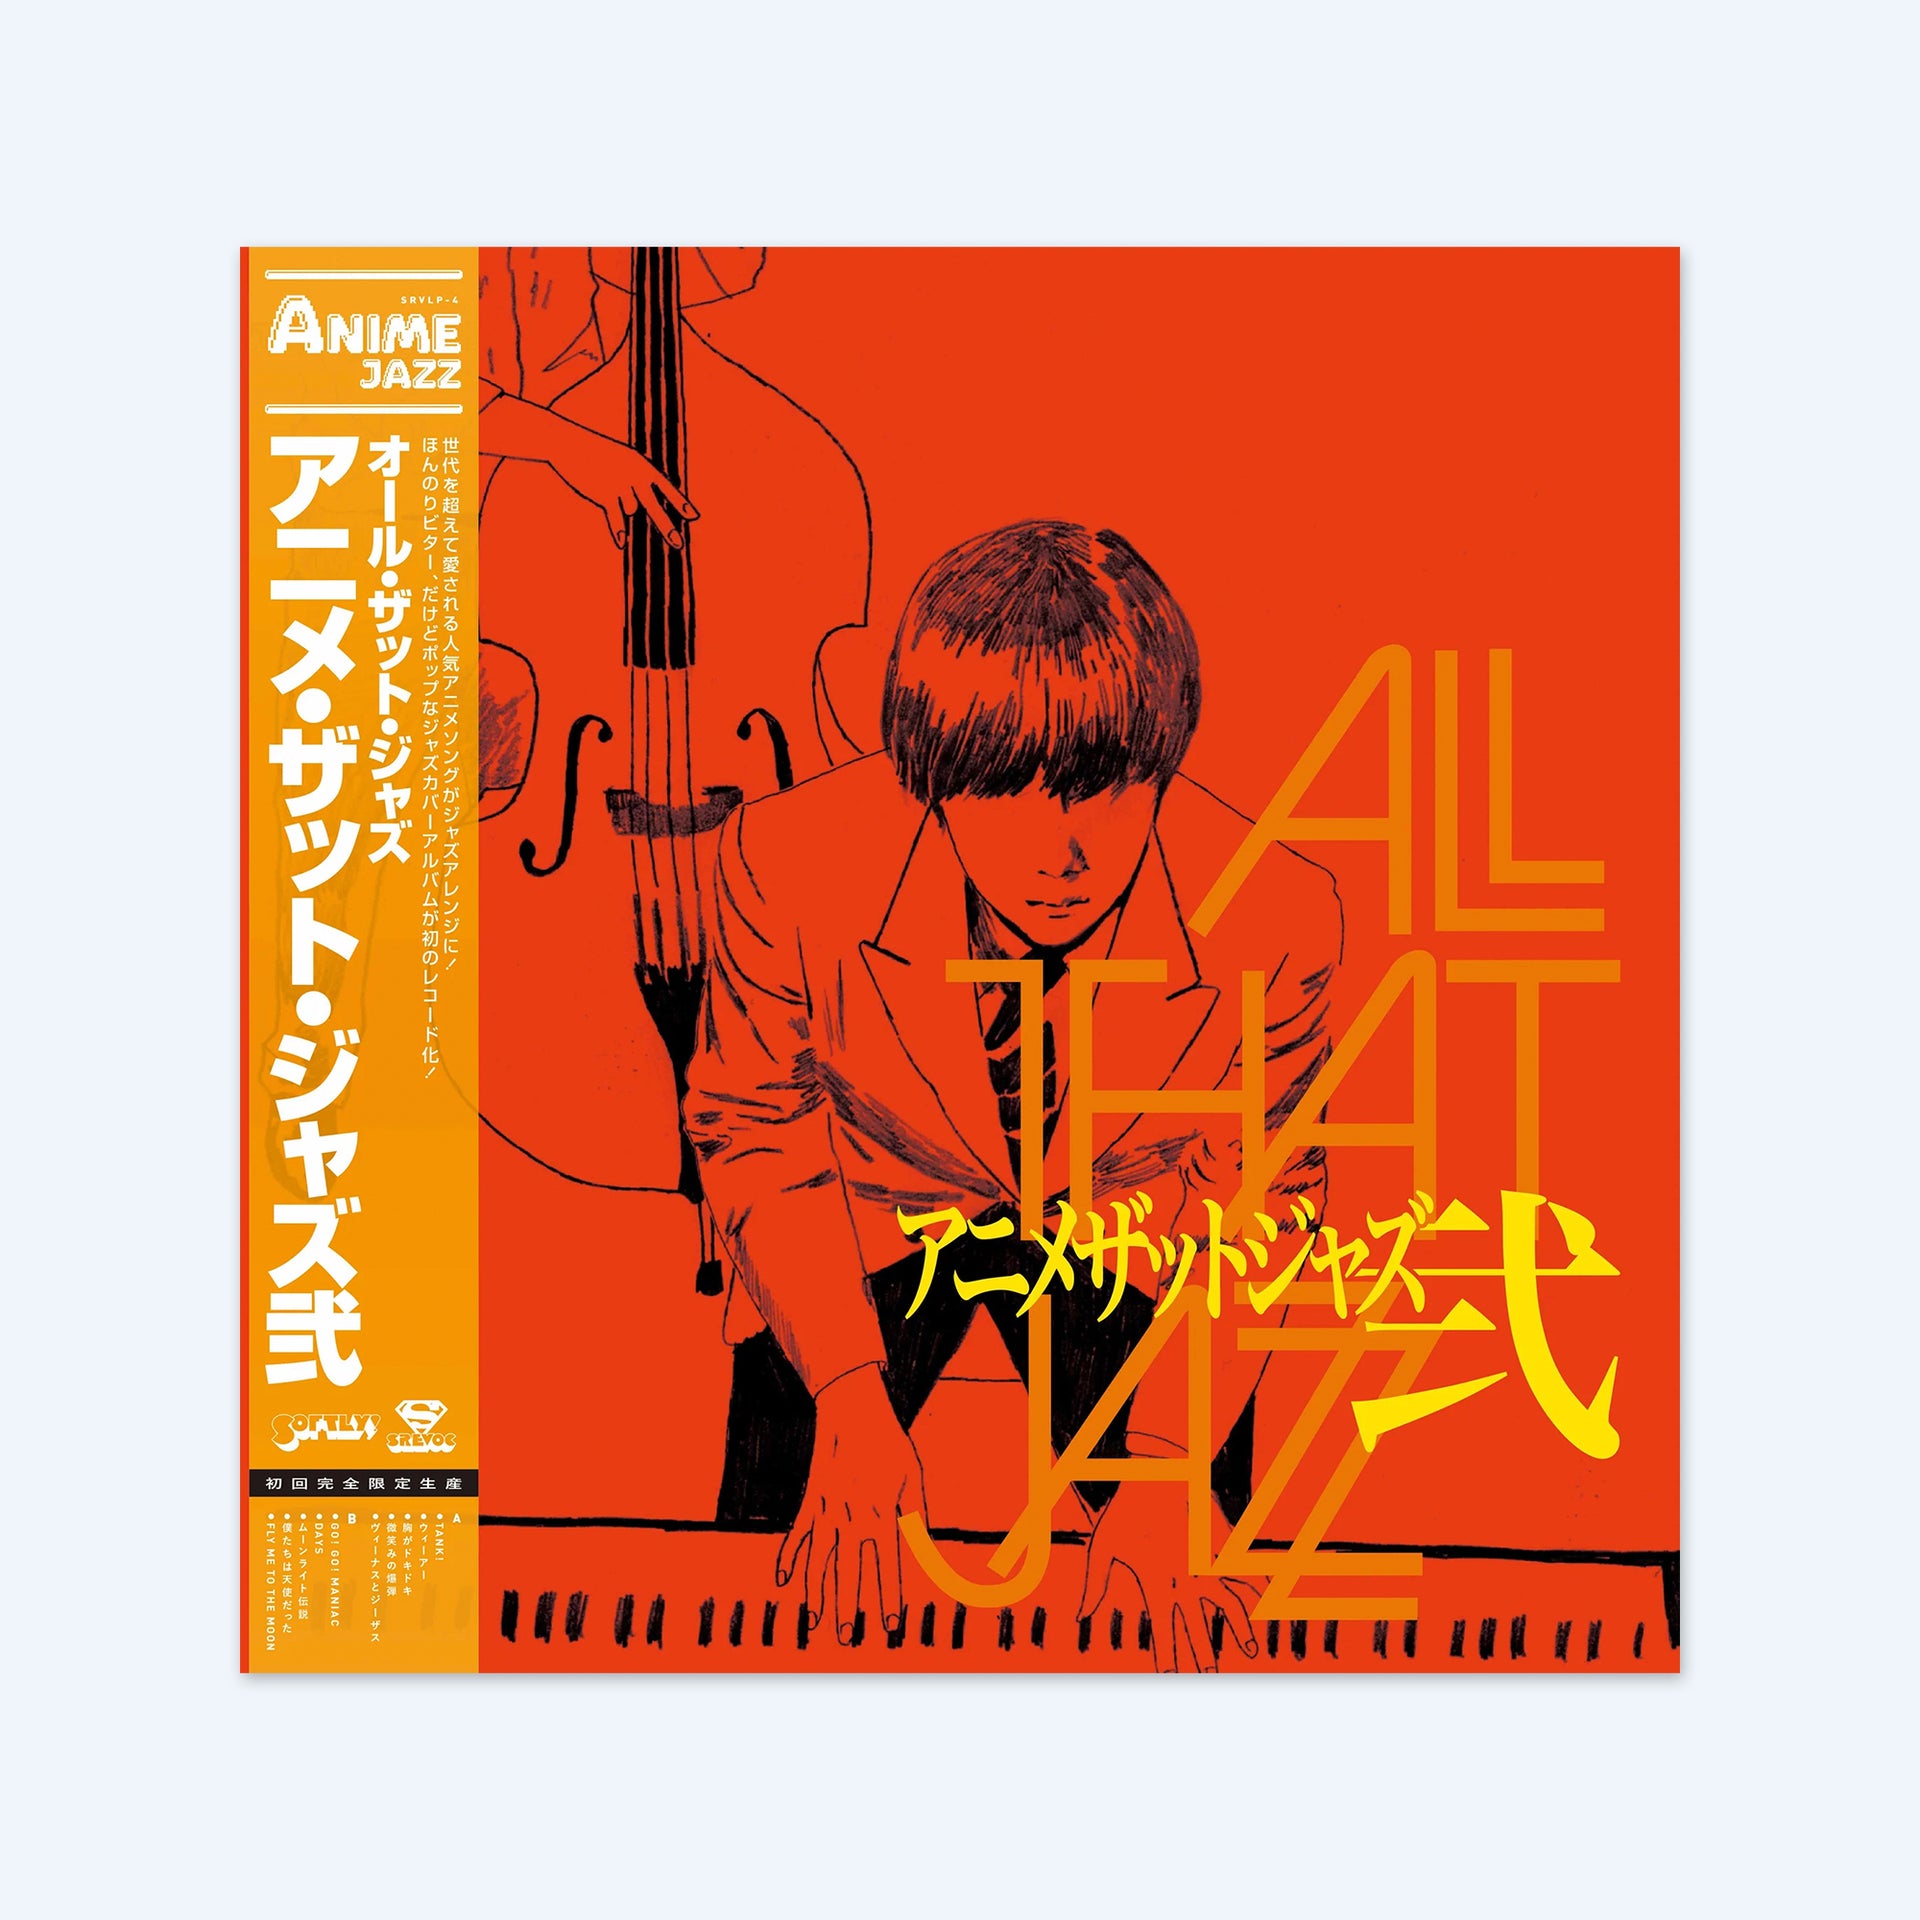 Anime That Jazz 2 by All That Jazz